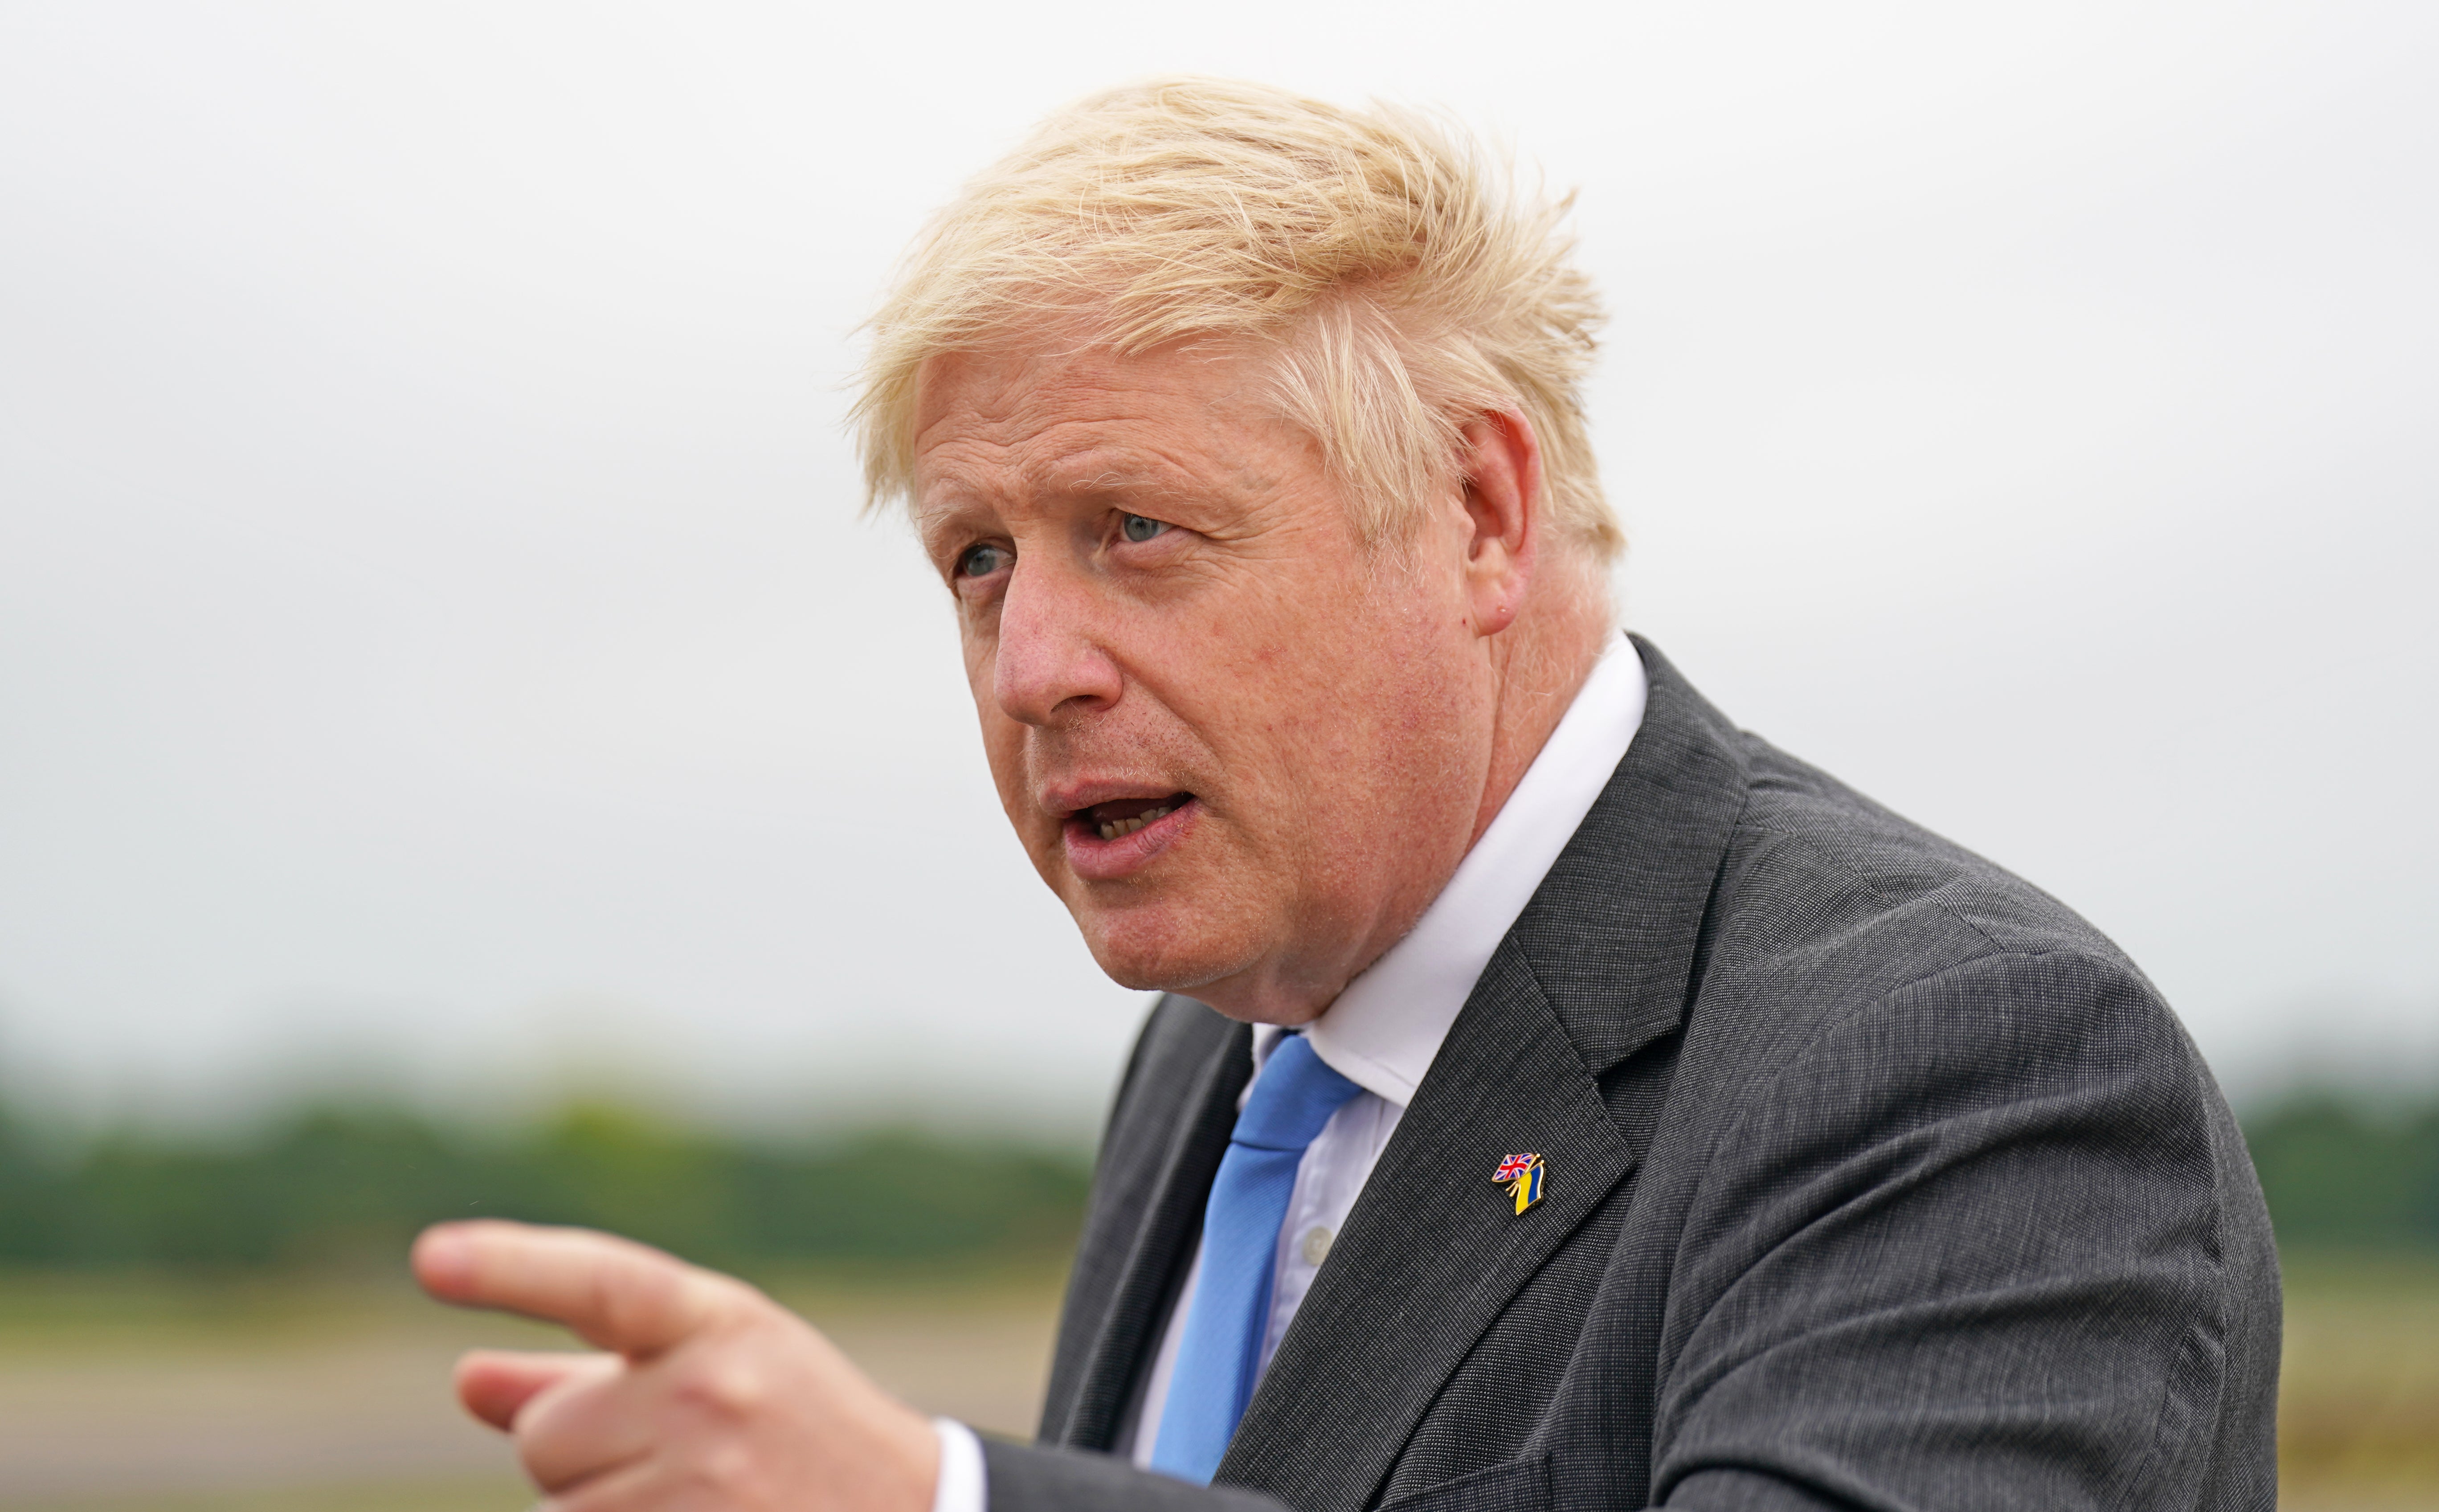 Prime Minister Boris Johnson, after arriving at RAF Brize Norton in Oxfordshire, following a surprise visit to meet with Ukrainian President Volodymyr Zelensky in Kyiv, Ukraine, to offer a major training operation he believes could “change the equation” against the Russian invasion. Picture date: Saturday June 18, 2022.